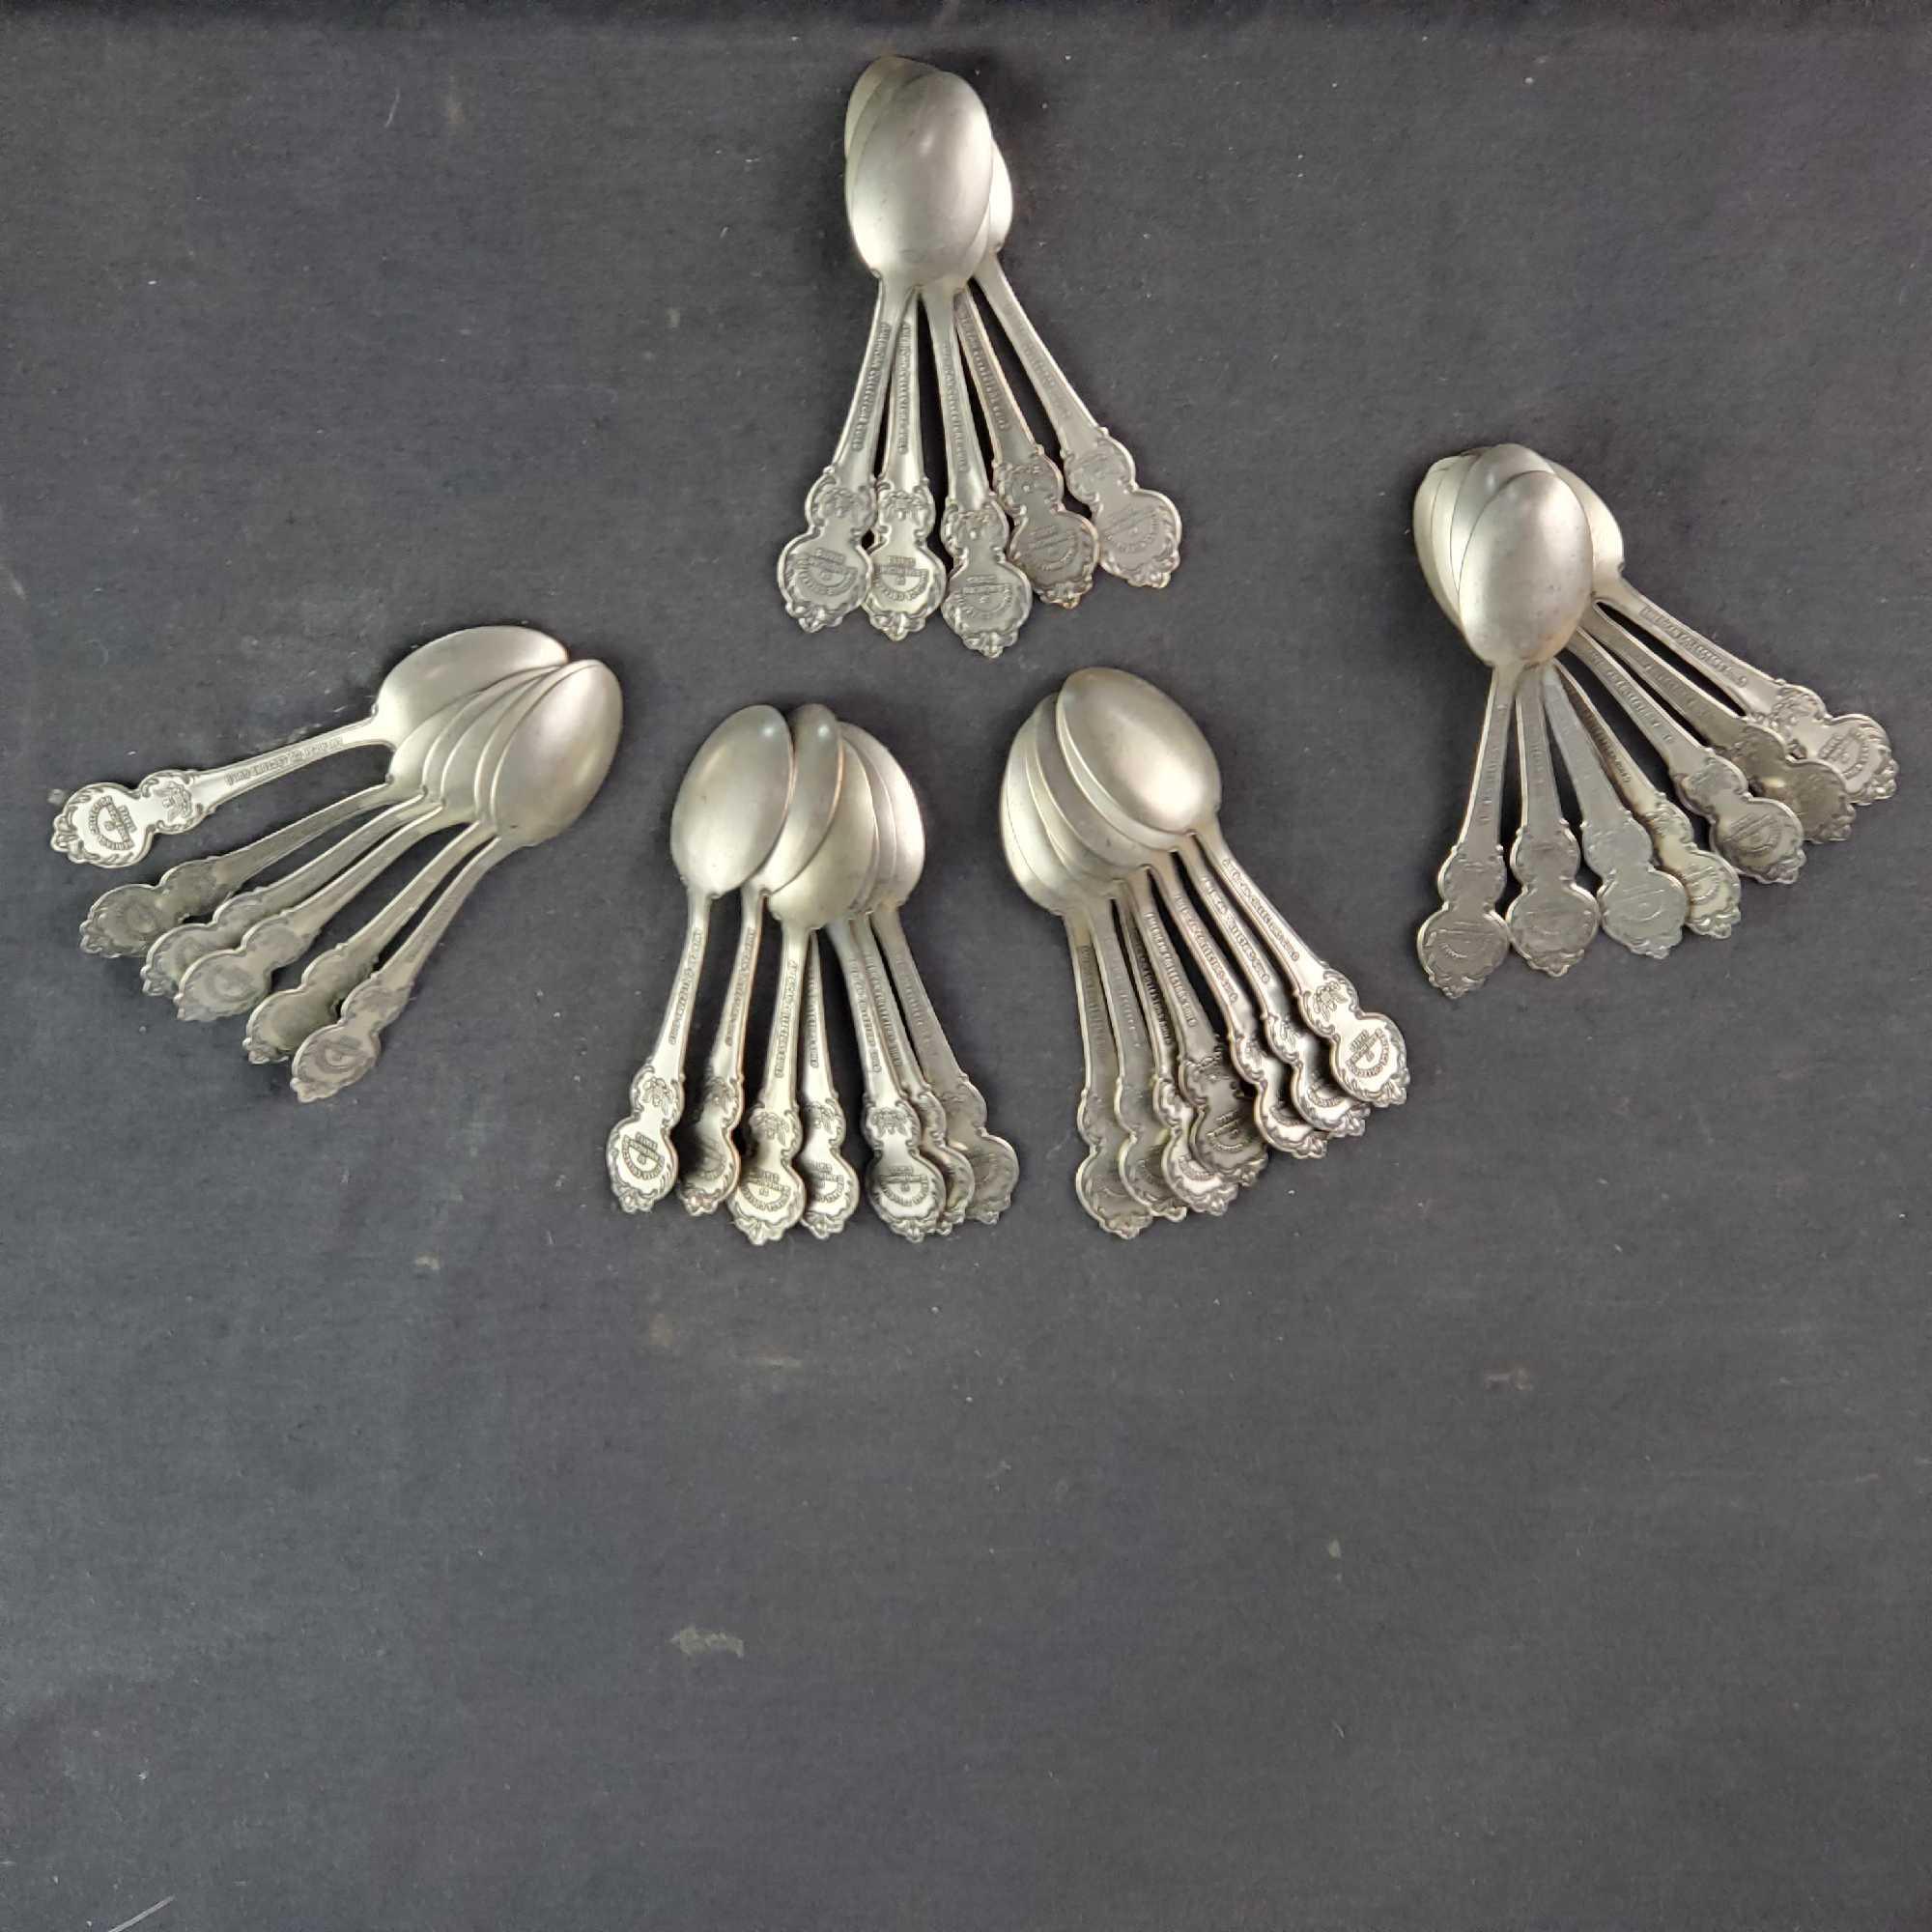 Lot of approx. 30 American Collectors Guild Heritage state silverplate spoons 501.0 Grams